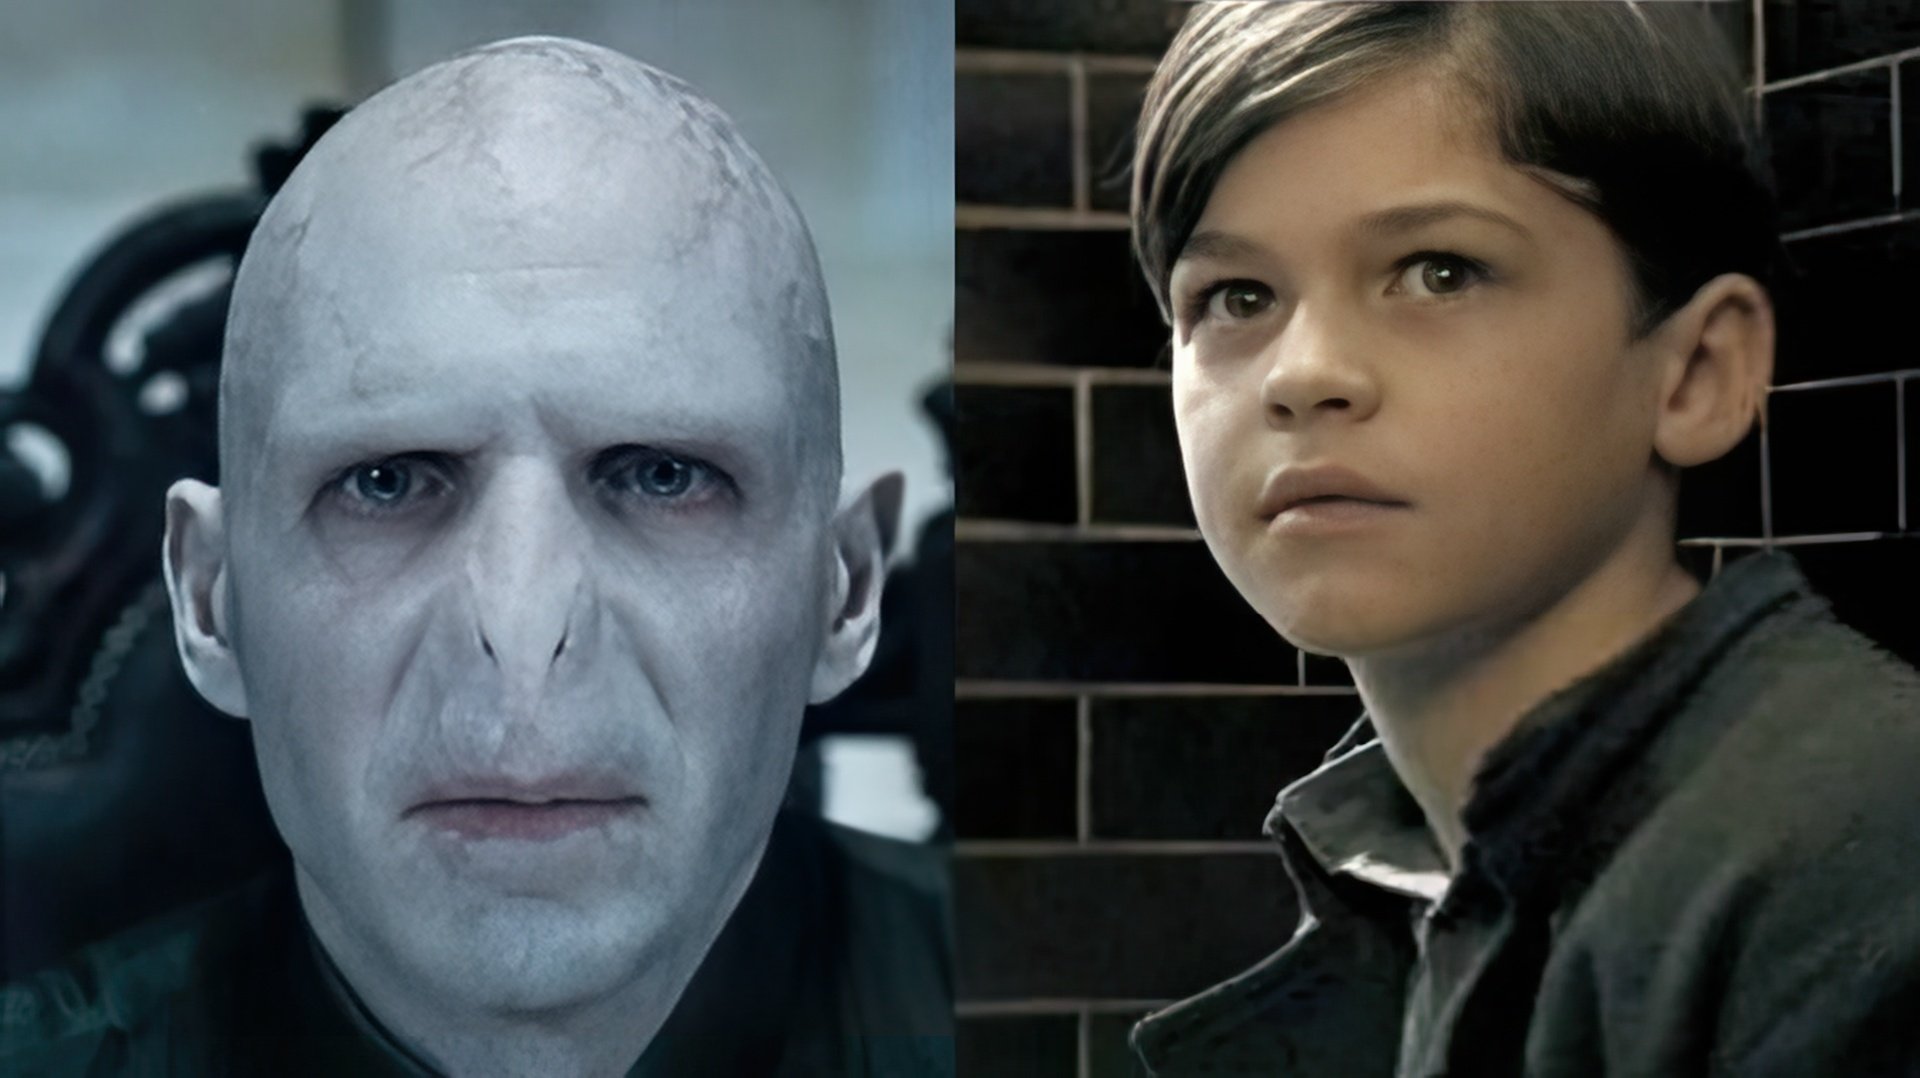 In 'The Half-Blood Prince' Hiro played a young Voldemort